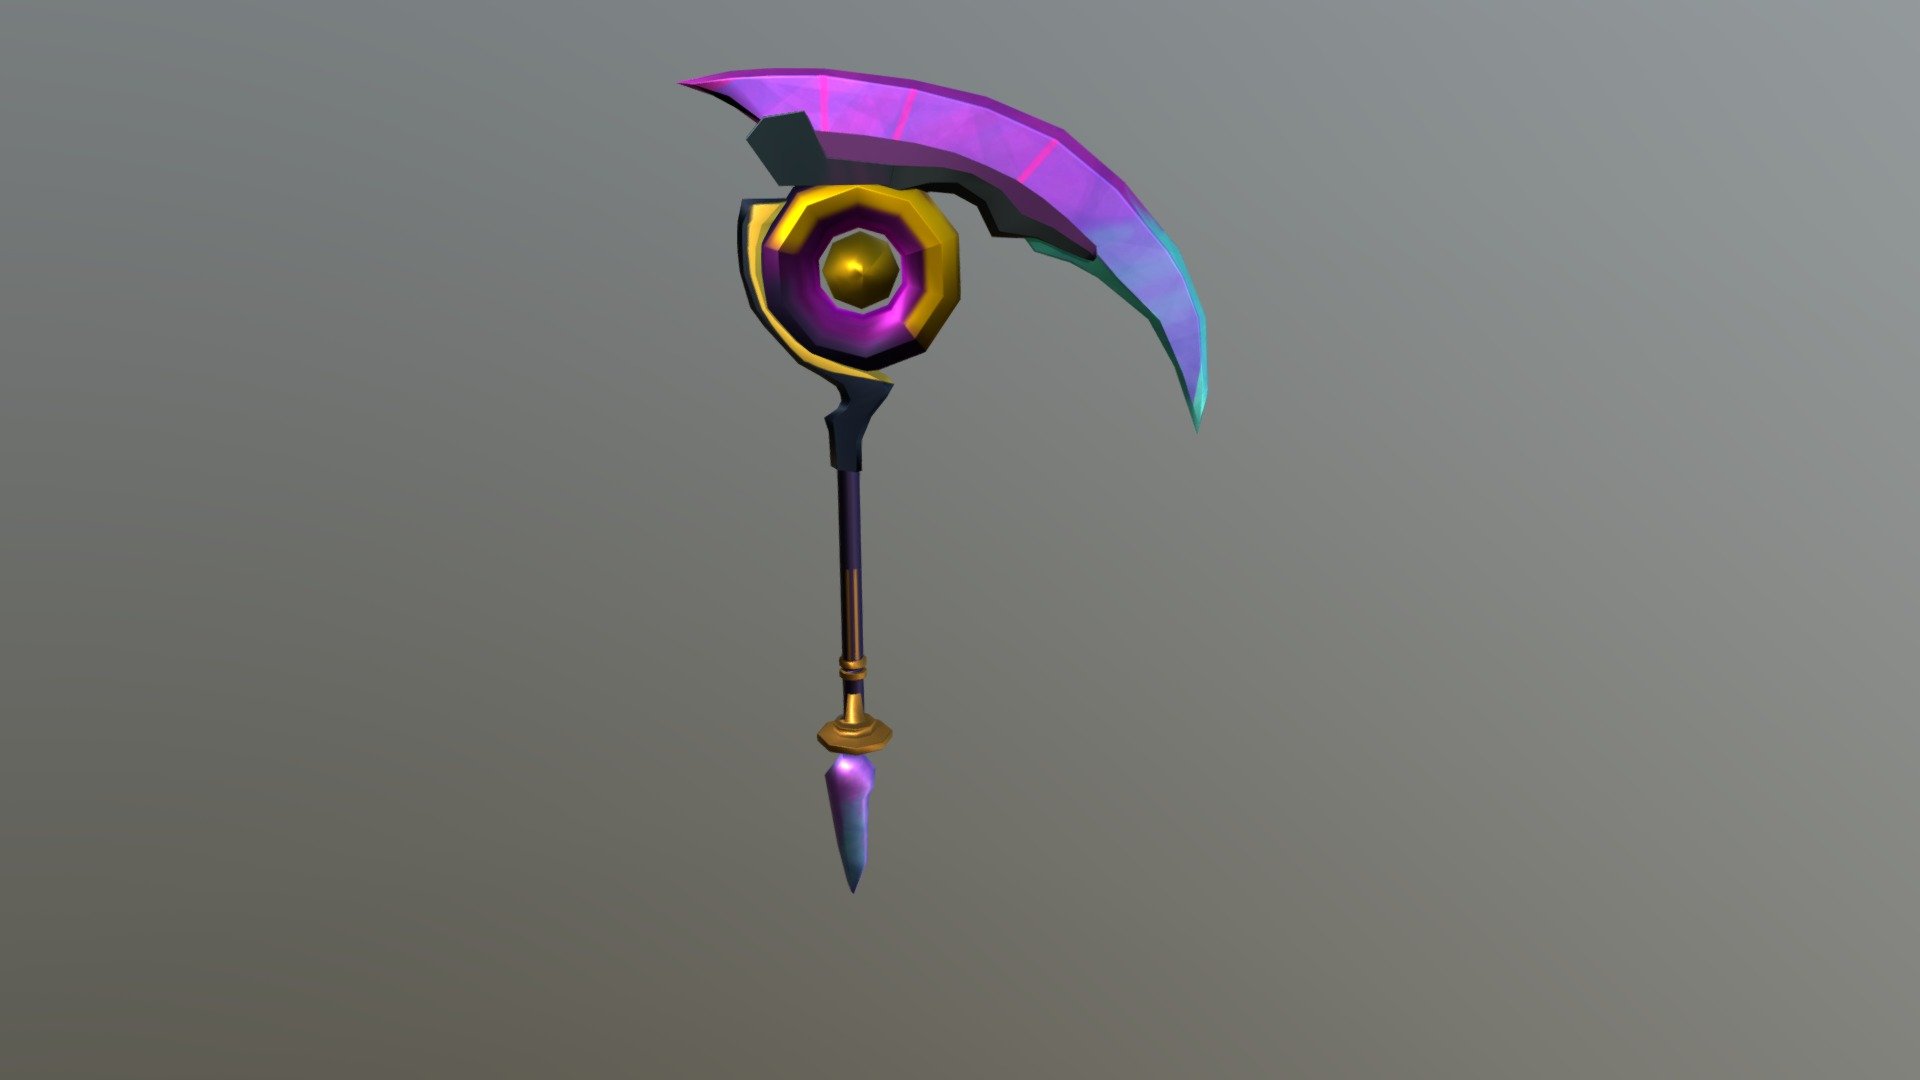 a model of Odyssey Kayn's scythe from the game League of legends - Odyssey Kayn's scythe - 3D model by Speedophile 3d model